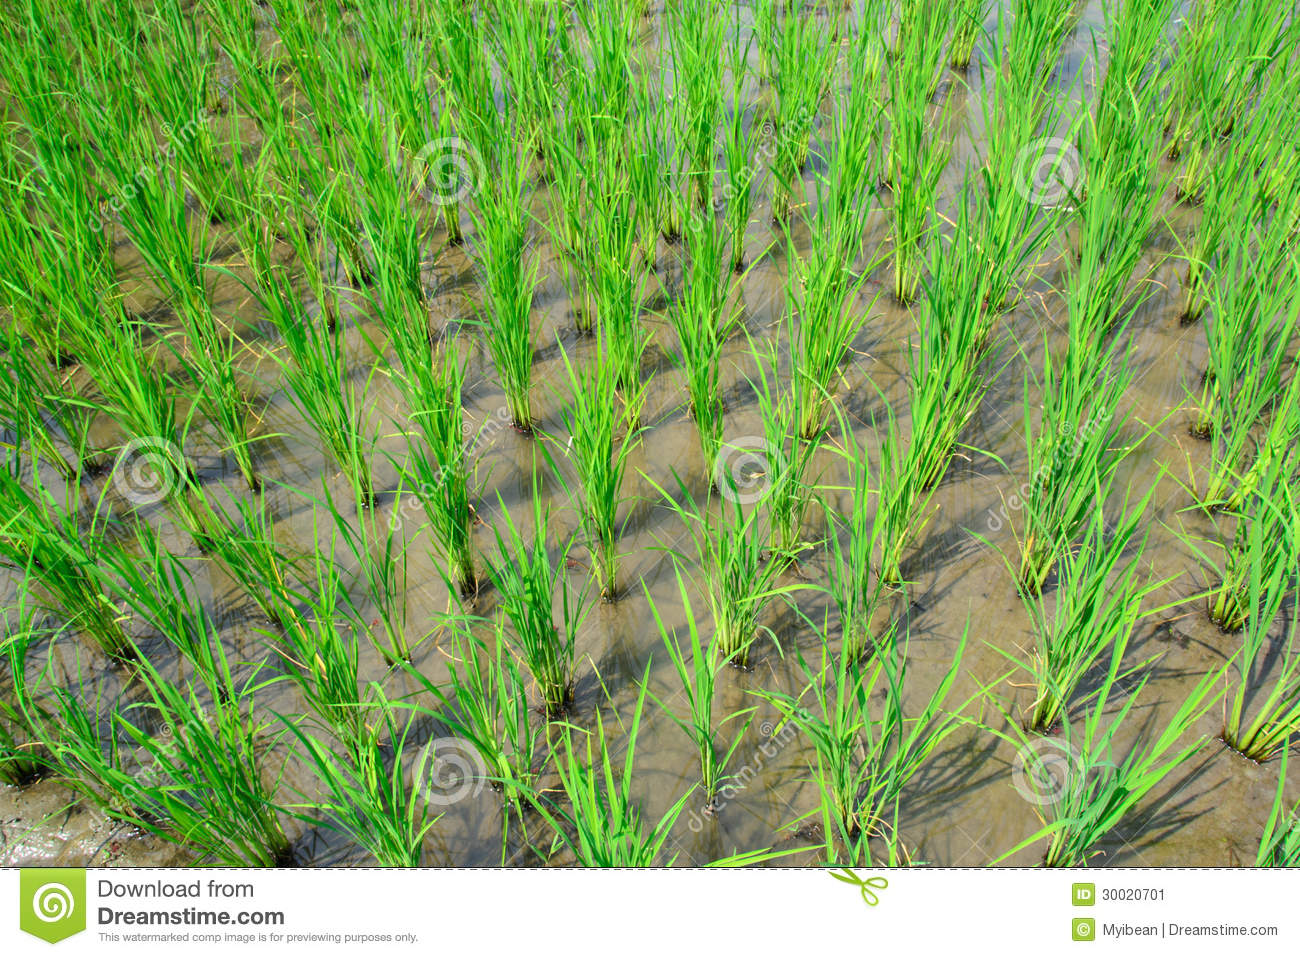 Young Rice Plant In Rice Field Stock Image   Image  30020701